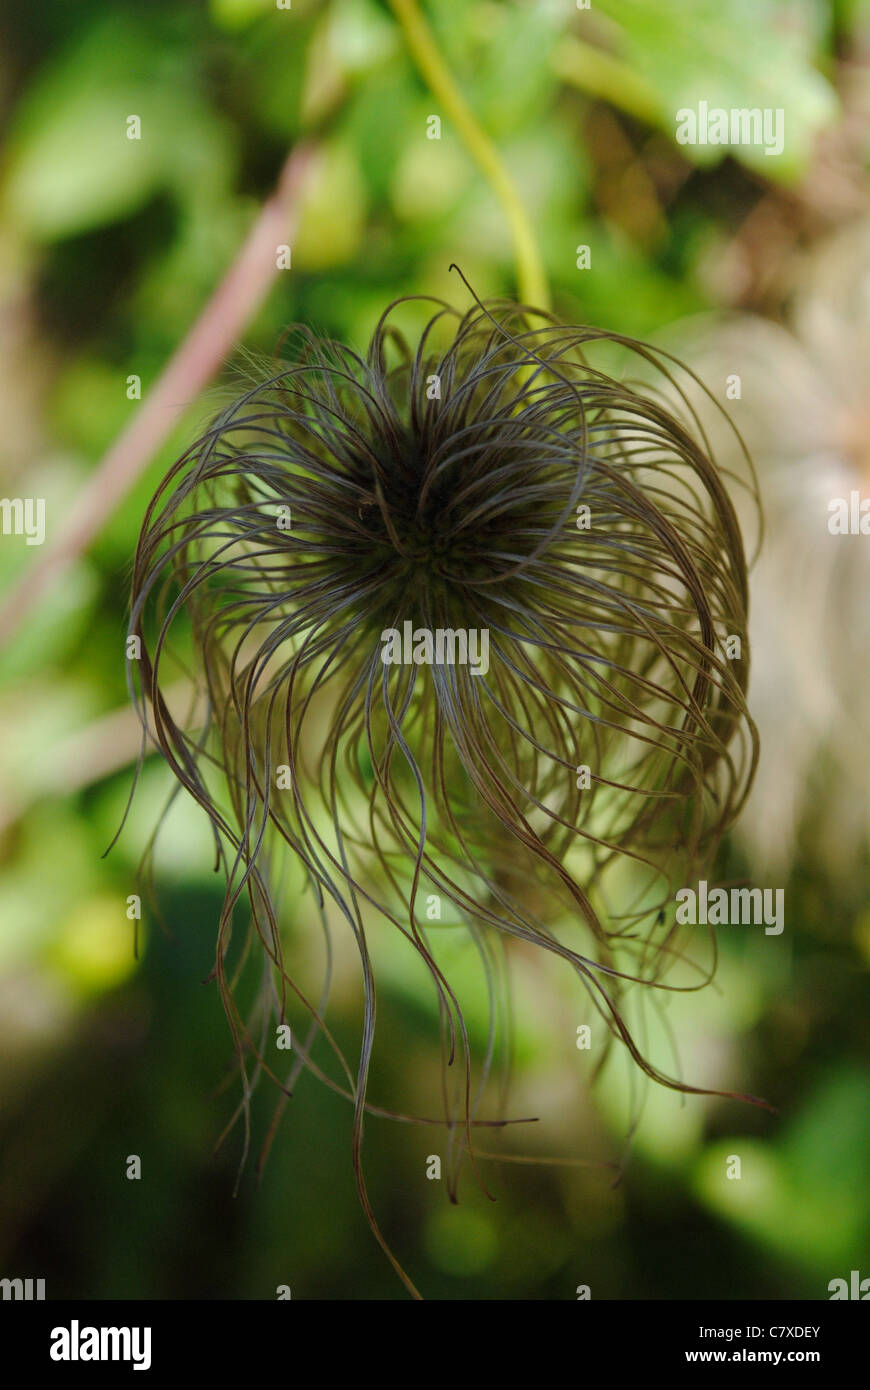 Clematis Seed Head Stock Photo